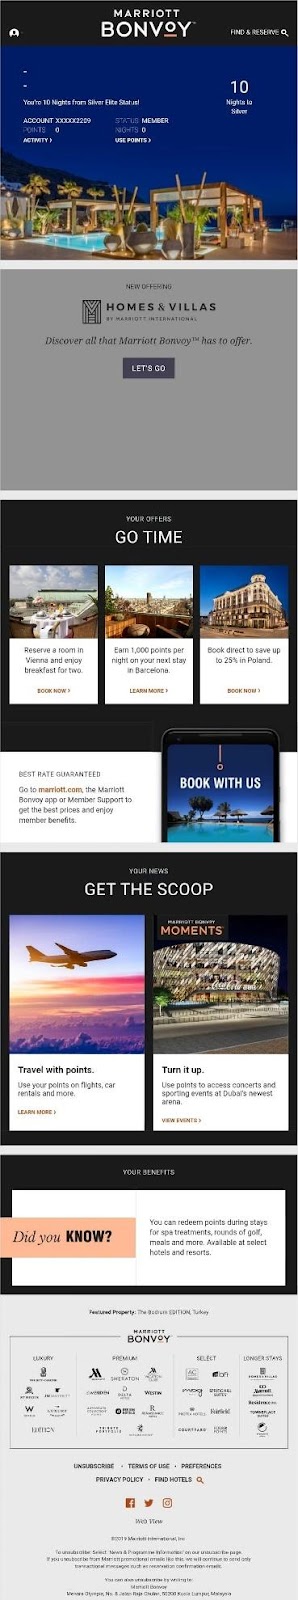 Marriott travel email example